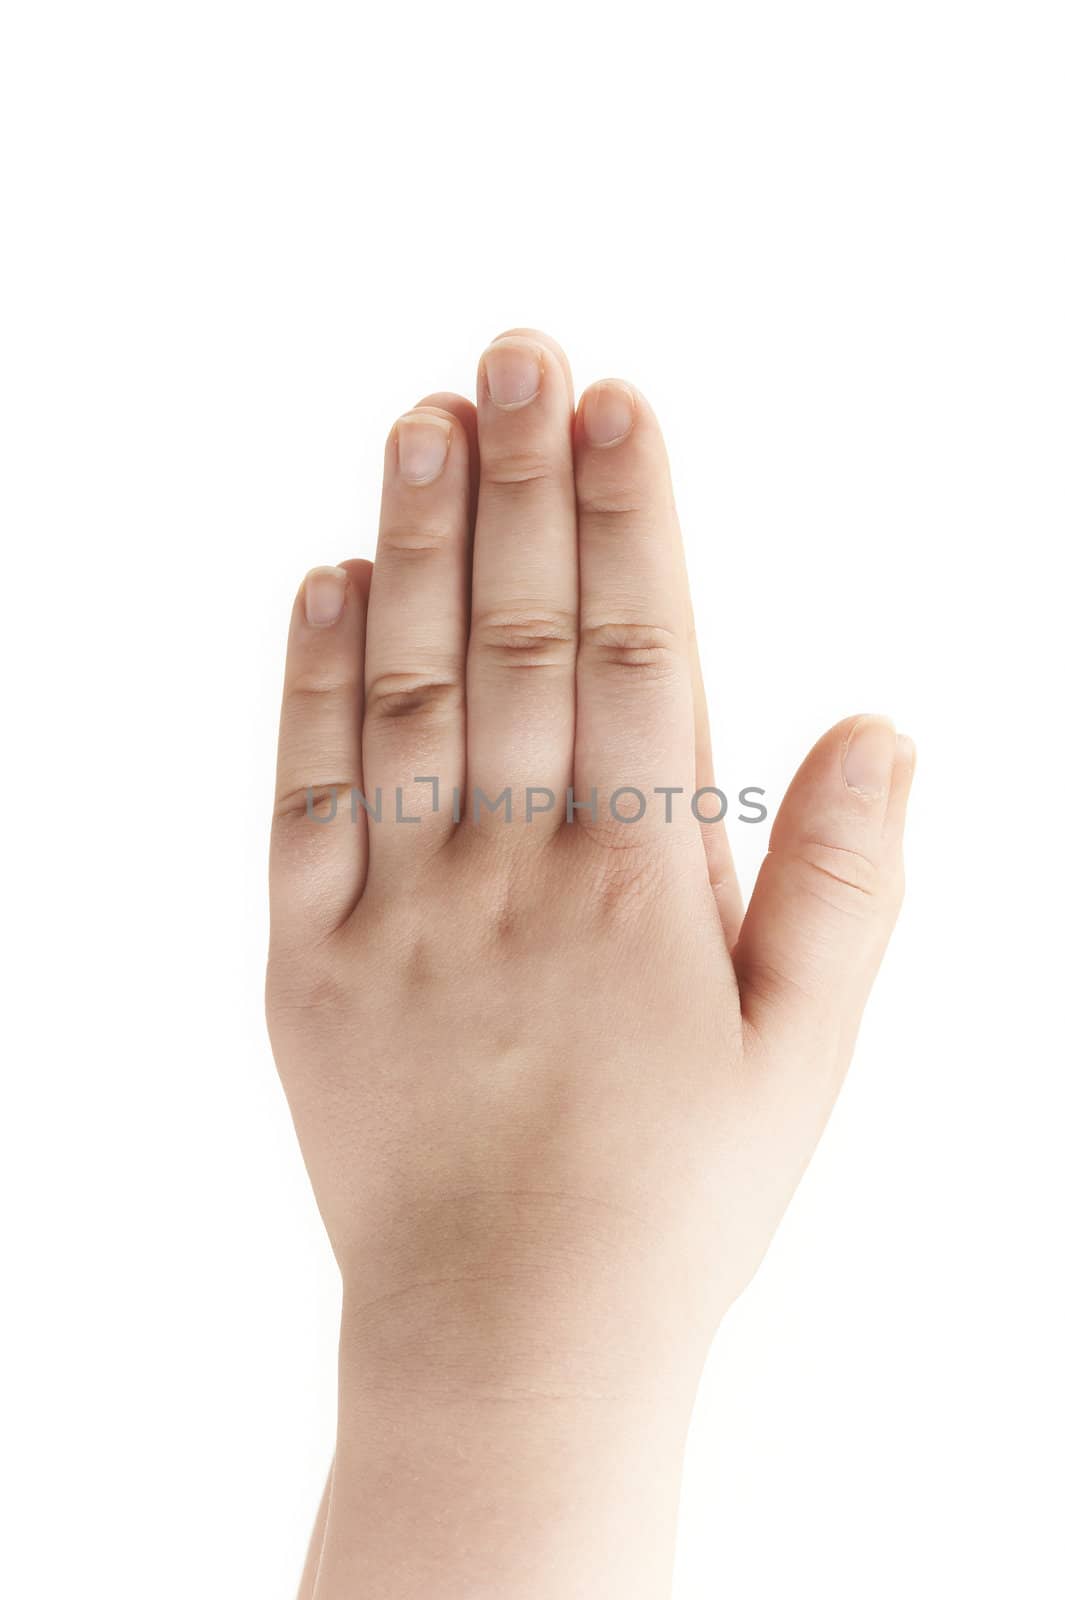 Hands of child - palms facing towards each other - on white background